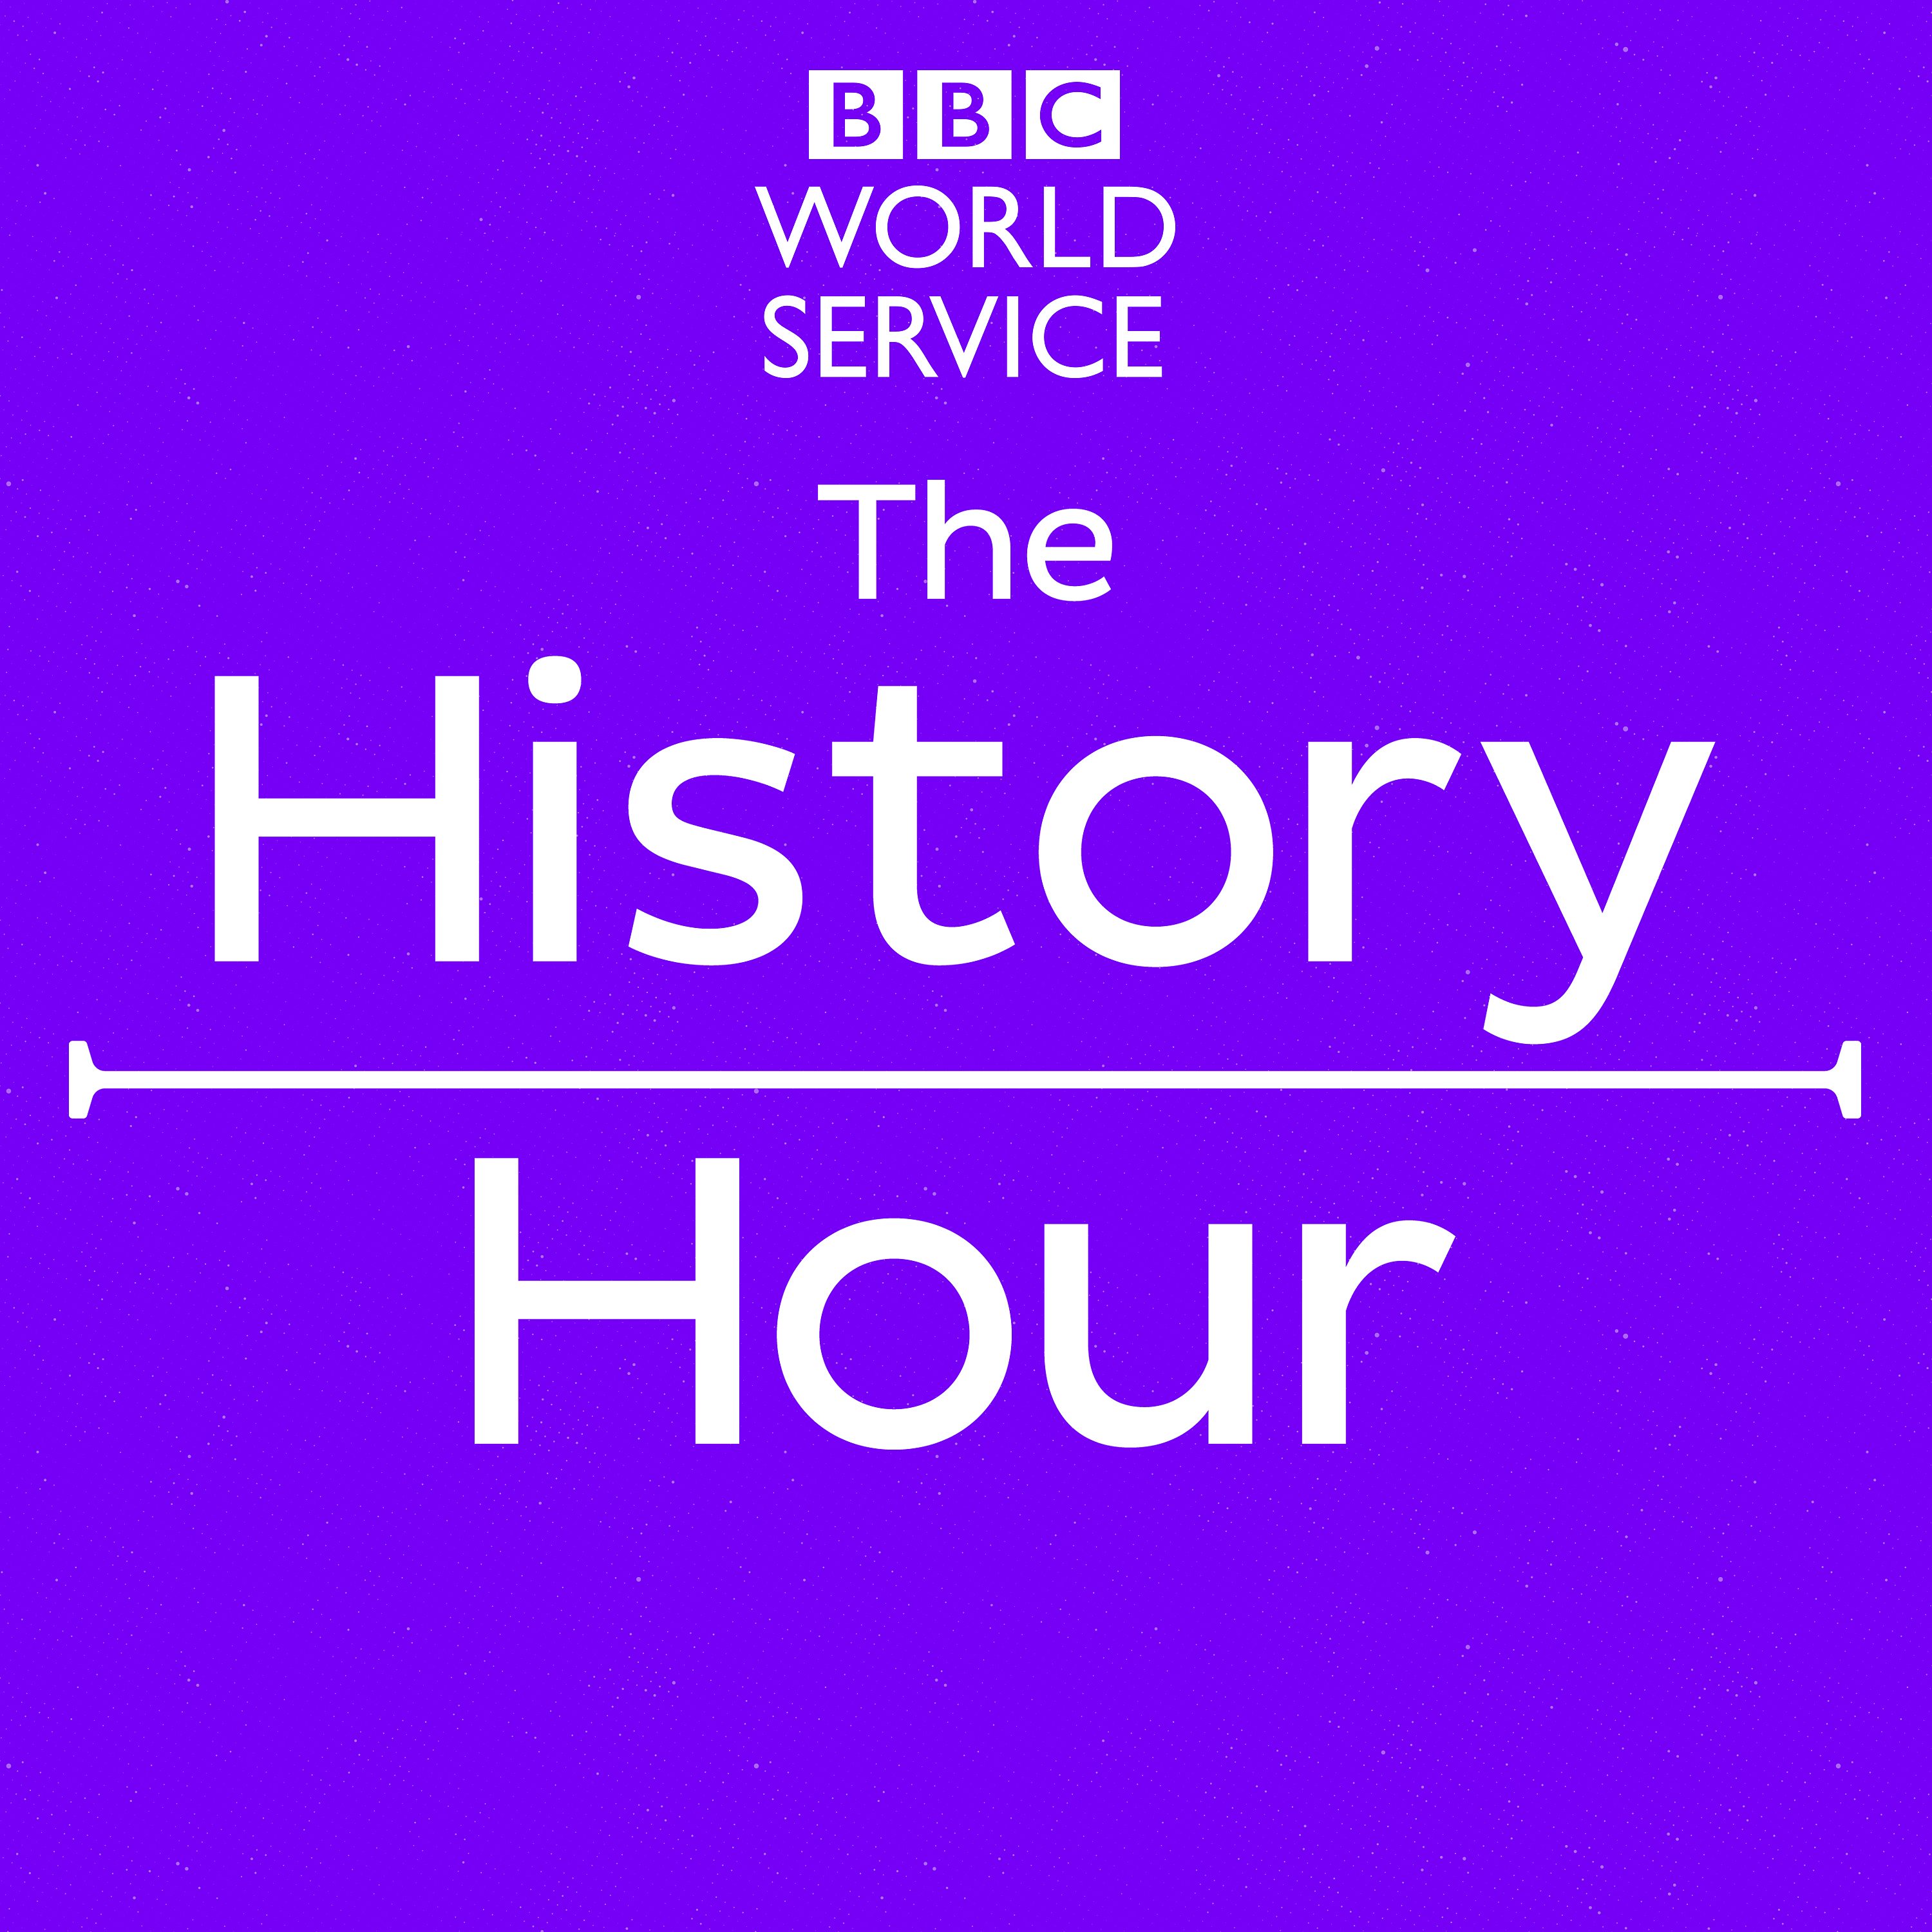 Nazi eugenics and the year of the vuvuzela : Max Pearson presents a collection of this weeks Witness History episodes from the BBC World ServiceWe hear about the people with disabilities who were sterilised in Germany following an order in 193344 passed by the then Chancellor Adolf HitlerAlso44 we find out about the first man to descend into the Gates of Hell44 the Darvaza Crater44 in TurkmenistanPlus the story behind the vuvuzela which was dubbed the worlds most annoying instrumentContributors:Helga Gross who was sterilised in Germany as part of the Nazis eugenics order This is an archive interview from the United States Holocaust Memorial MuseumDr Susanne Klausen44 Julia Gregg Brill Professor of Womenrsquos44 Gender and Sexuality Studies at the Pennsylvania State UniversityCampaigner Emma Bonino who fought for legal abortion in ItalyExplorer George Kourounis who was the first person to descend into the Darvaza Crater44 in TurkmenistanParamedic Daniel Ouma who helped people injured in the Westgate Mall terror attack44 in Nairobi44 in Kenya44 in 2013Freddie rsquoSaddamrsquo Maake who claims to have invented the vuvuzelaPhoto: Adolf Hitler Credit: GammaKeystone via Getty Images